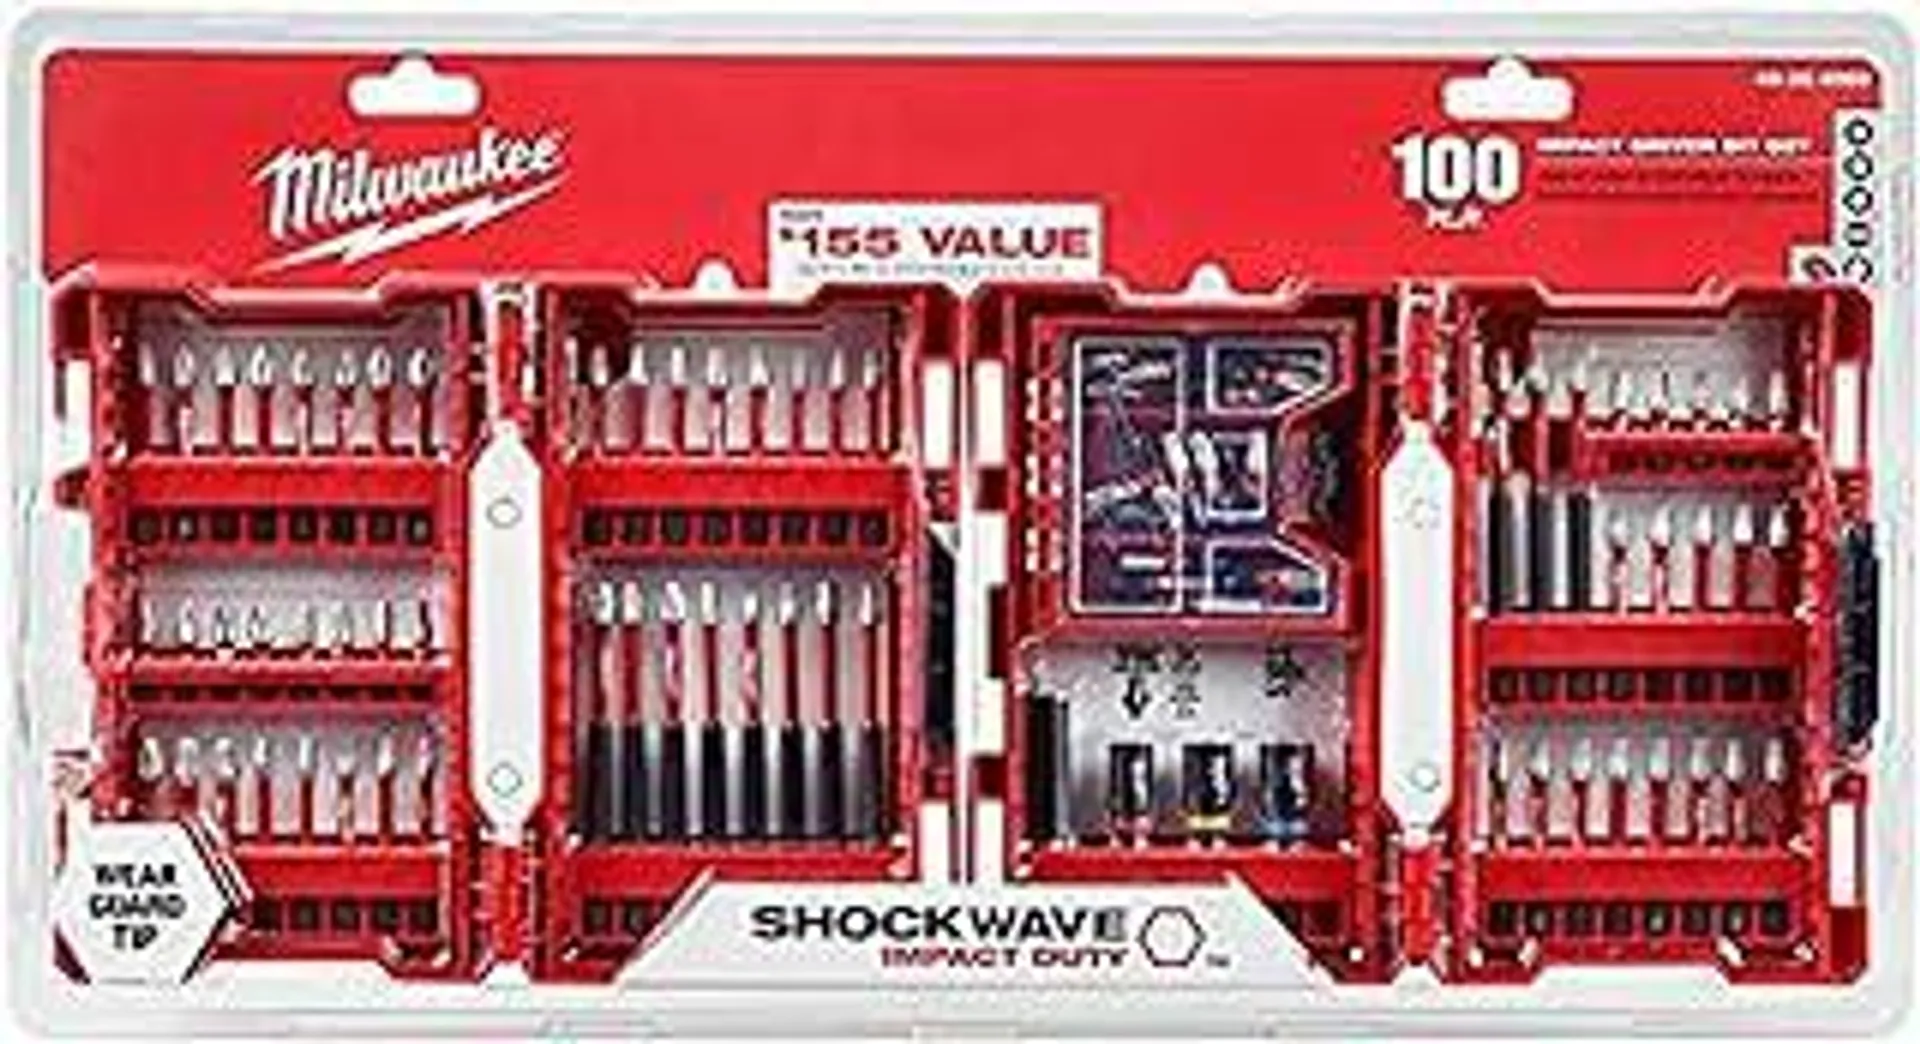 Shockwave Impact Duty Alloy Steel Drill and Screw Driver Bit Set (100-Piece)